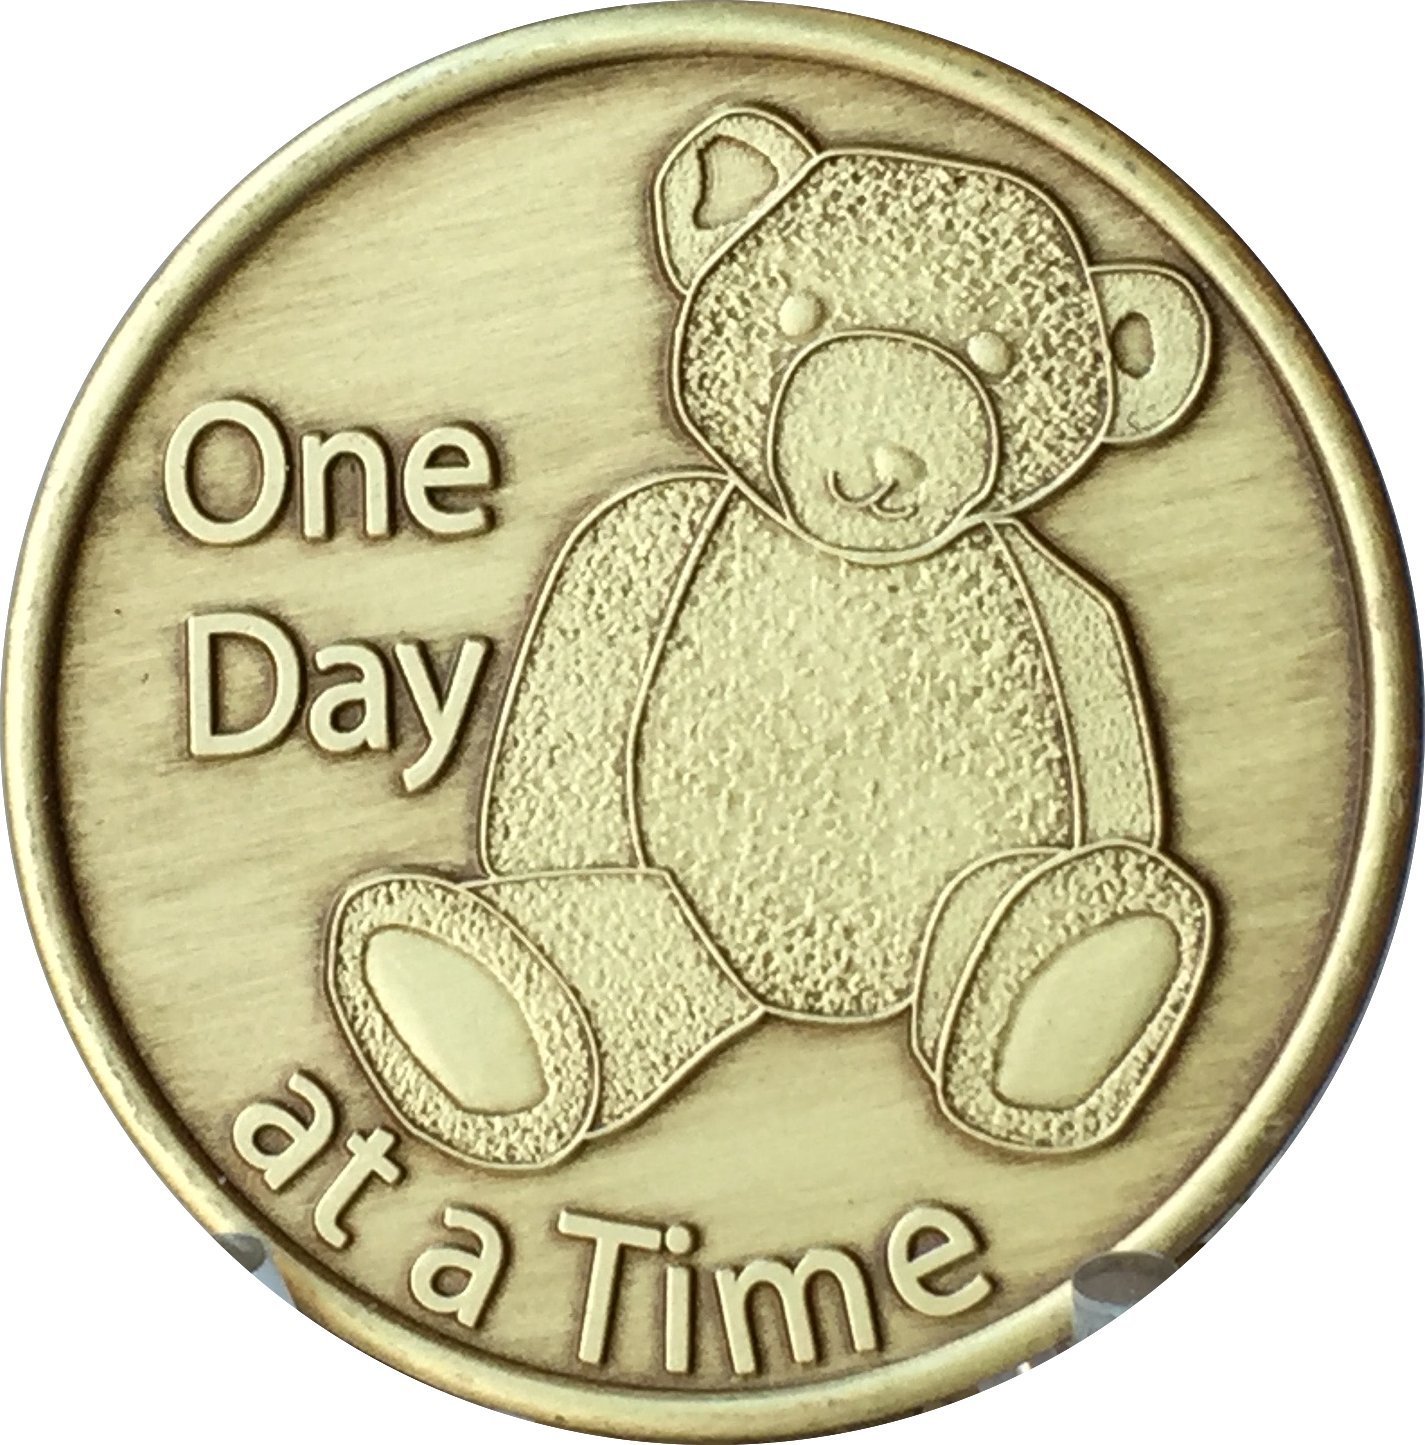 Bulk Lot of 25 Teddy Bear One Day At A Time Bronze Medallions Serenity Prayer...